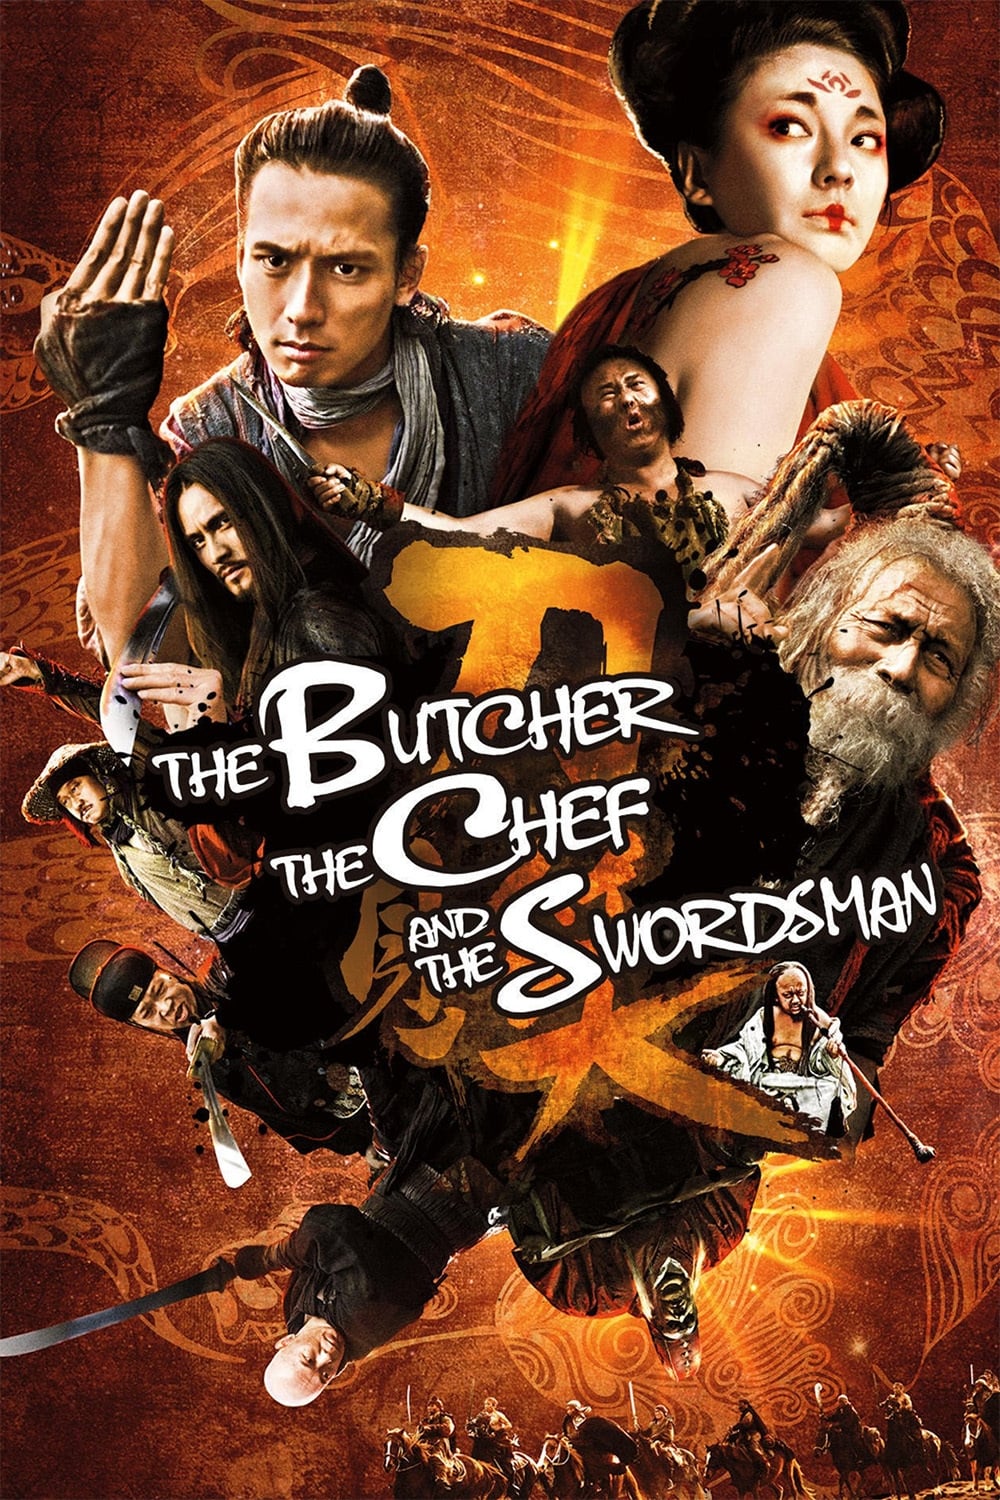 The Butcher, the Chef, and the Swordsman (2011)